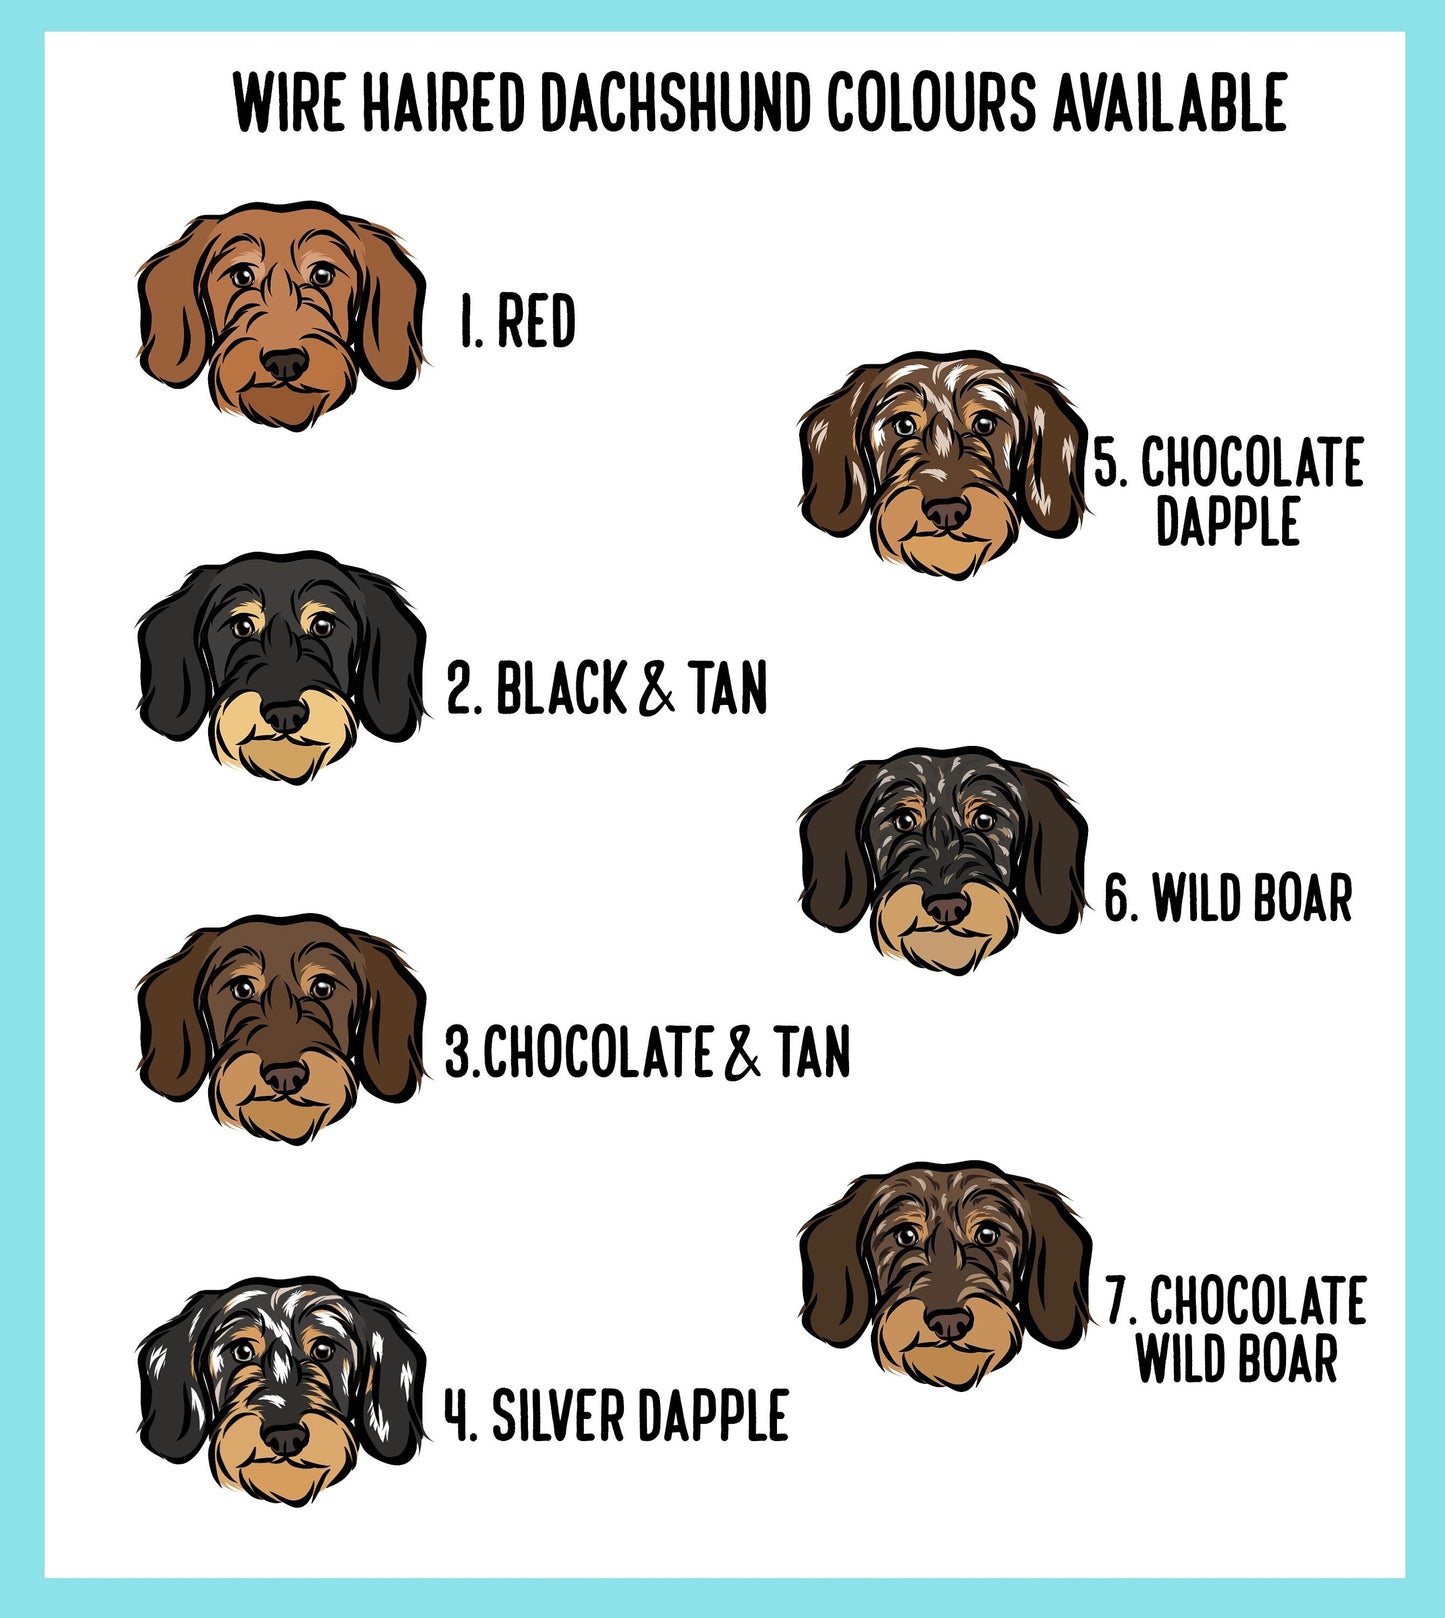 Wire Haired Dachshund Harness Customisable Sausage Dog Name Harness Cute Dachshund Face Pattern Harness Personalised Step In Harness Gift